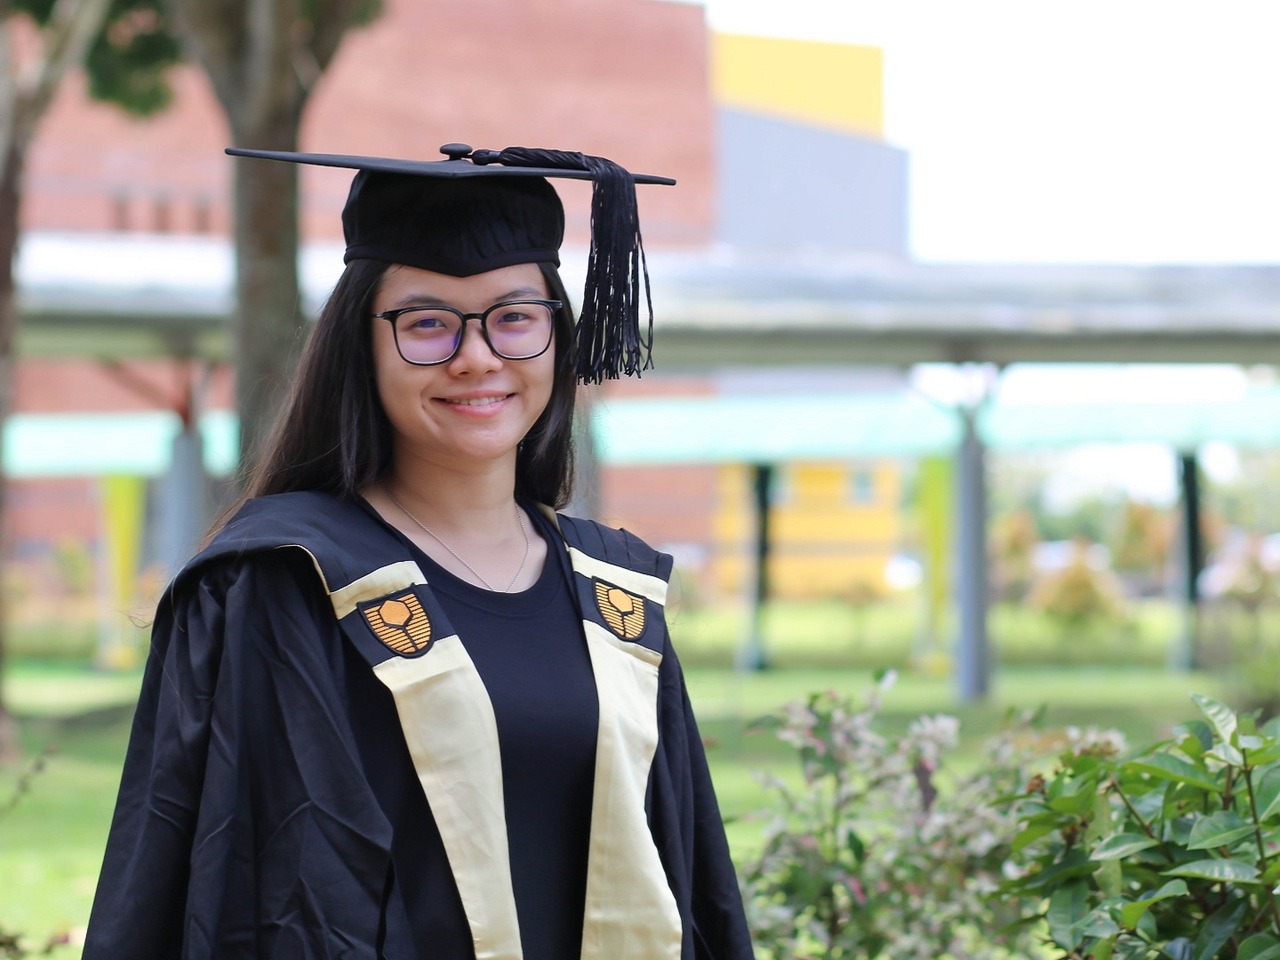 “As Curtin Malaysia attracts students from all over the world, I had the opportunity to work with students of diverse backgrounds and different ways of thinking. Inevitably, it helped me see and adopt new perspectives in learning and problem solving....